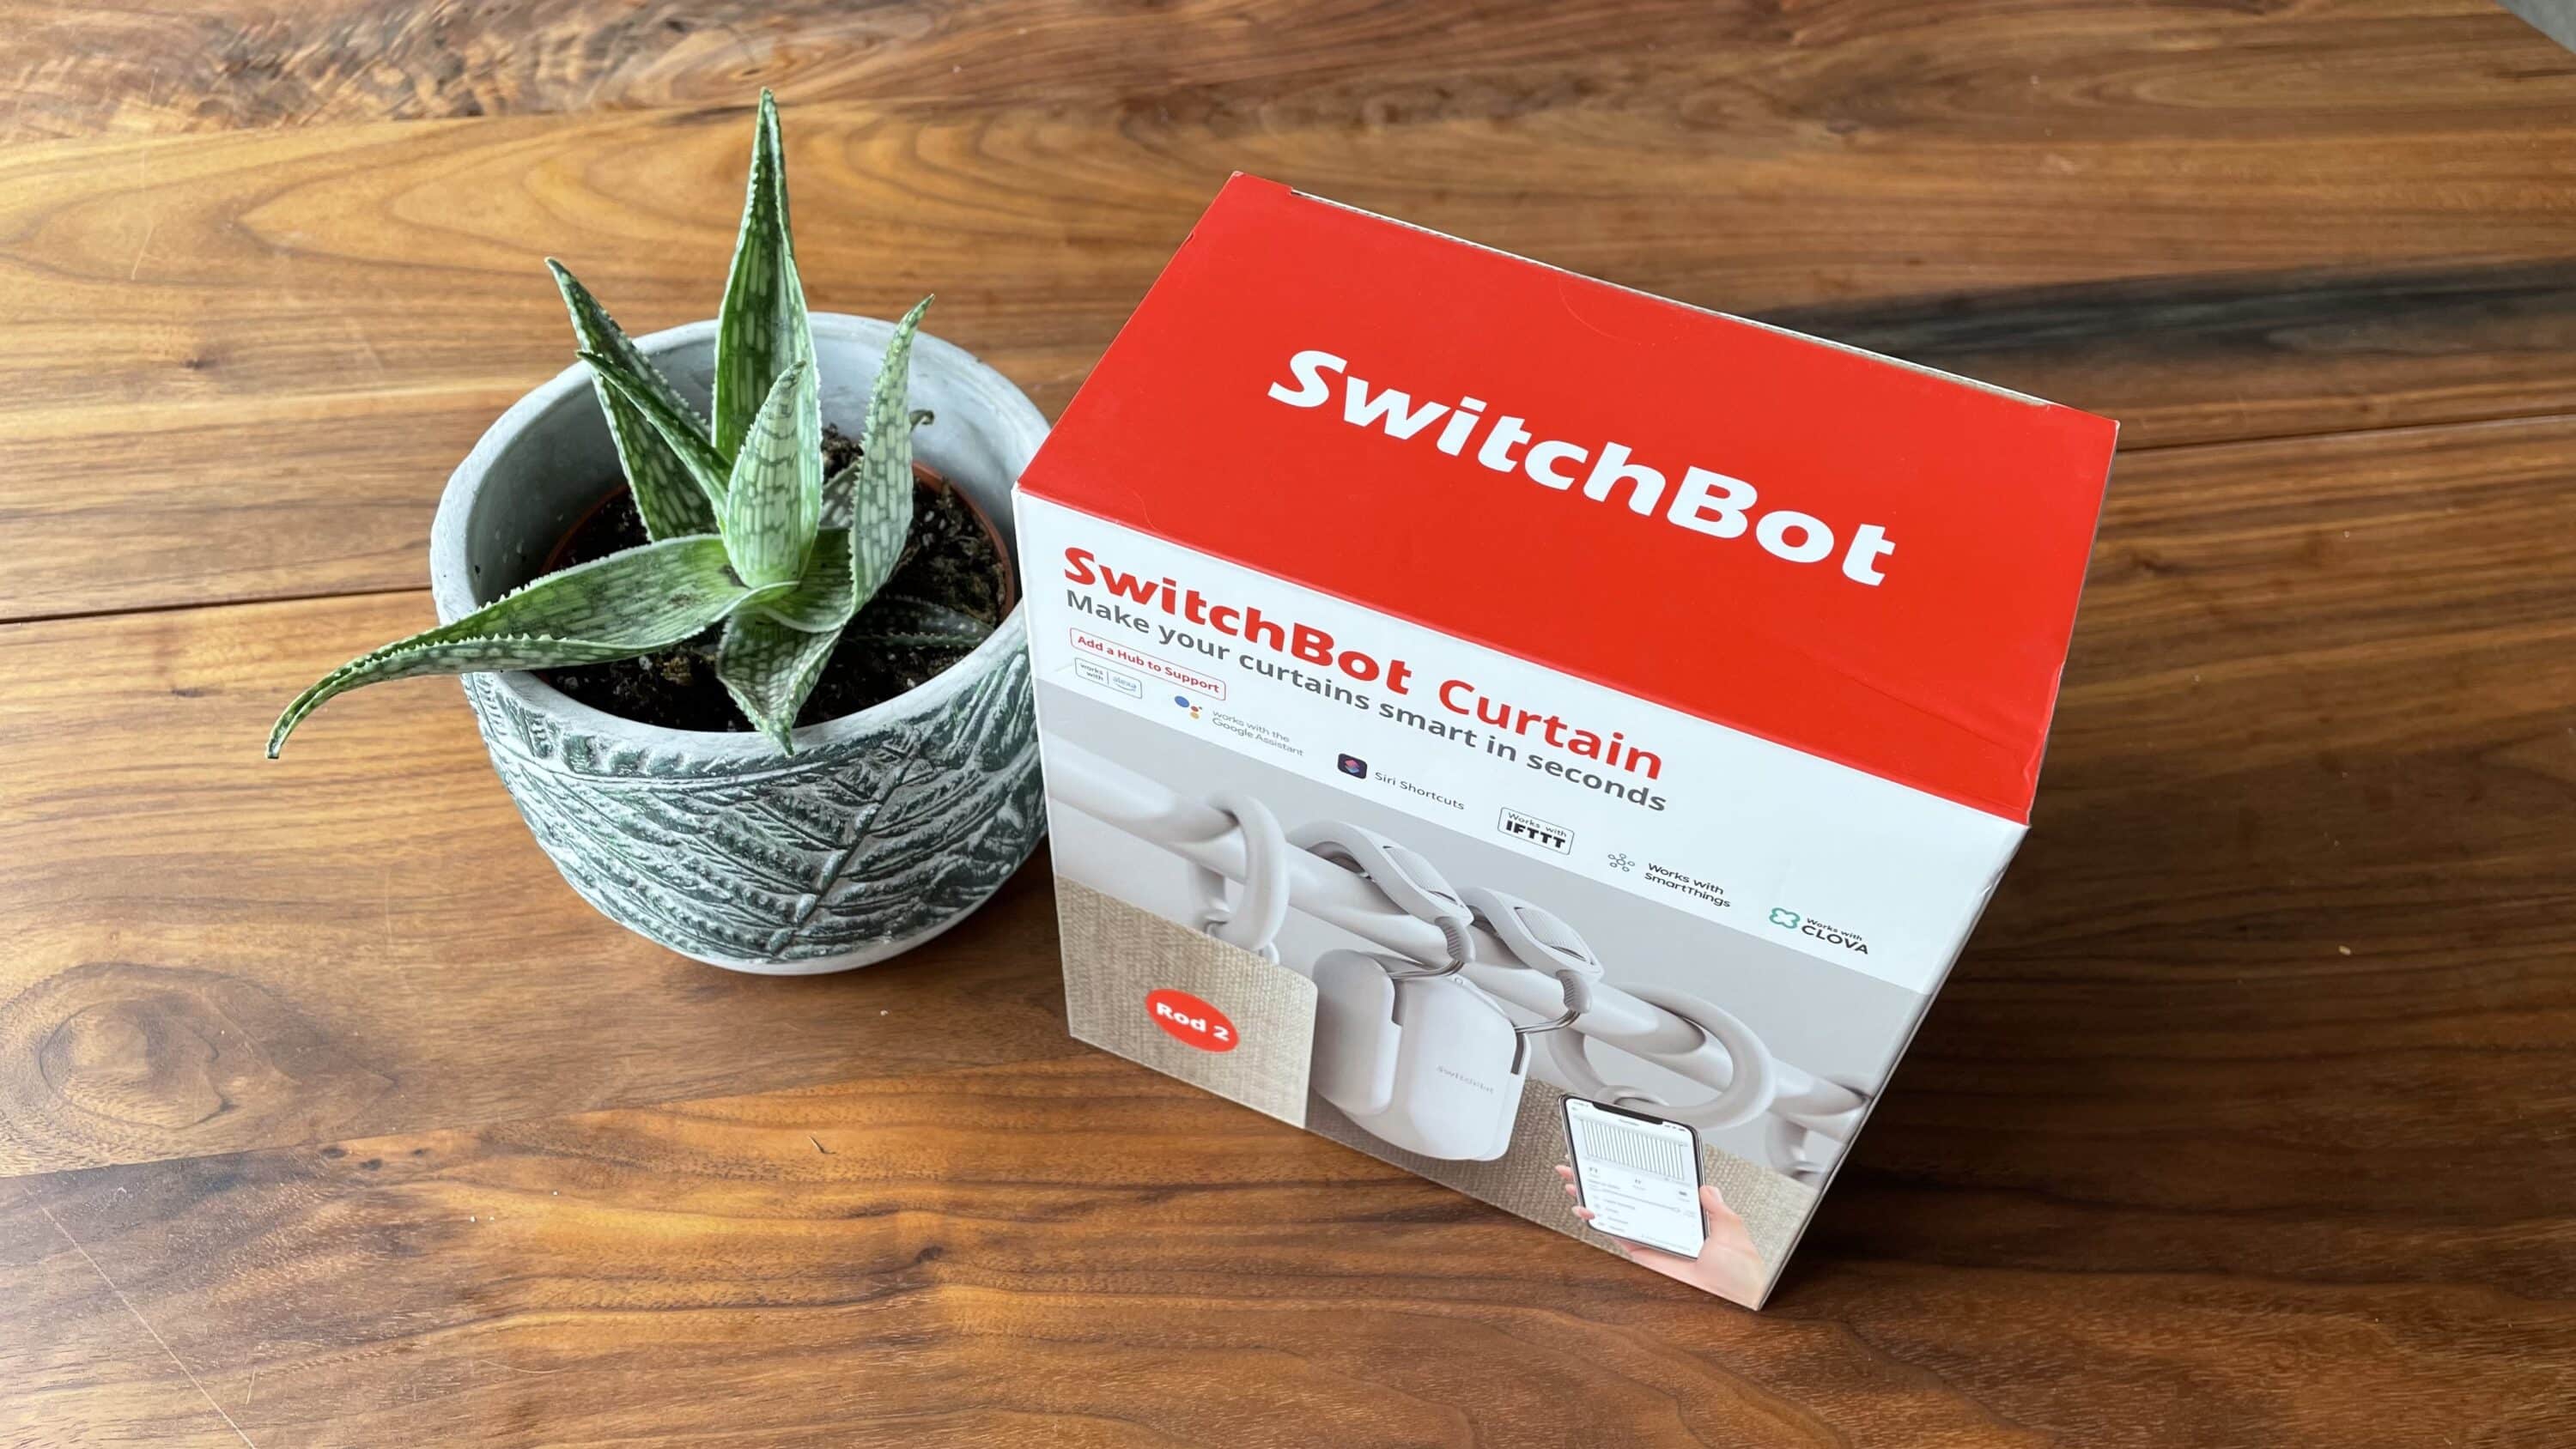 SwitchBot Curtain Rod 2 review: This smart curtain controller gets a  streamlined design